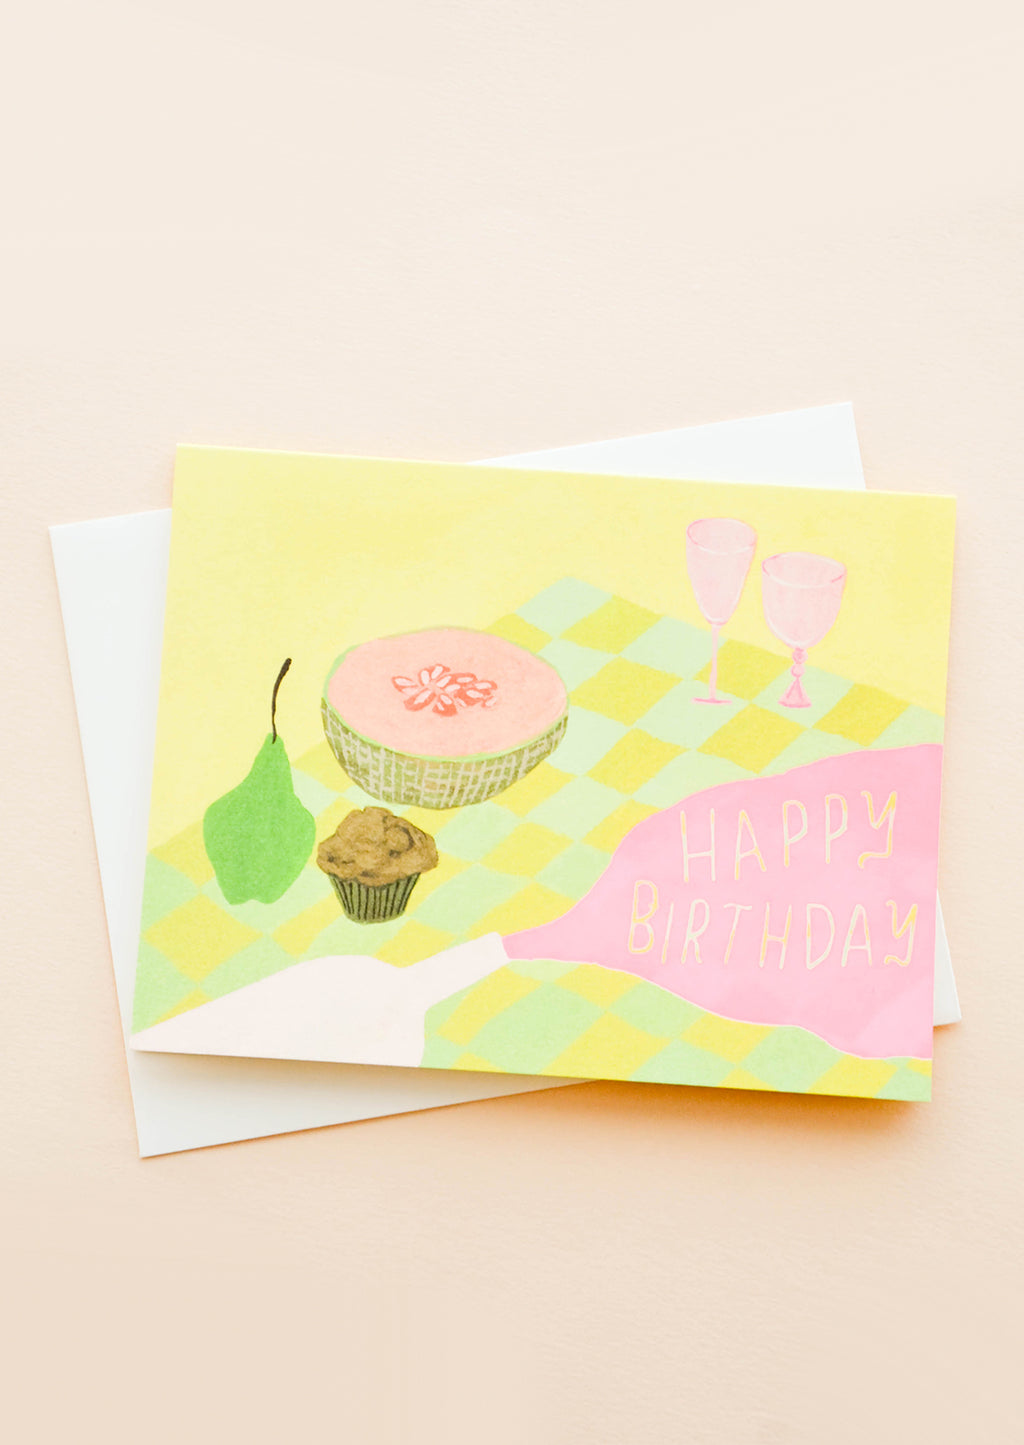 1: Greeting card with picnic setting, spilled wine puddle has letters reading "Happy Birthday"